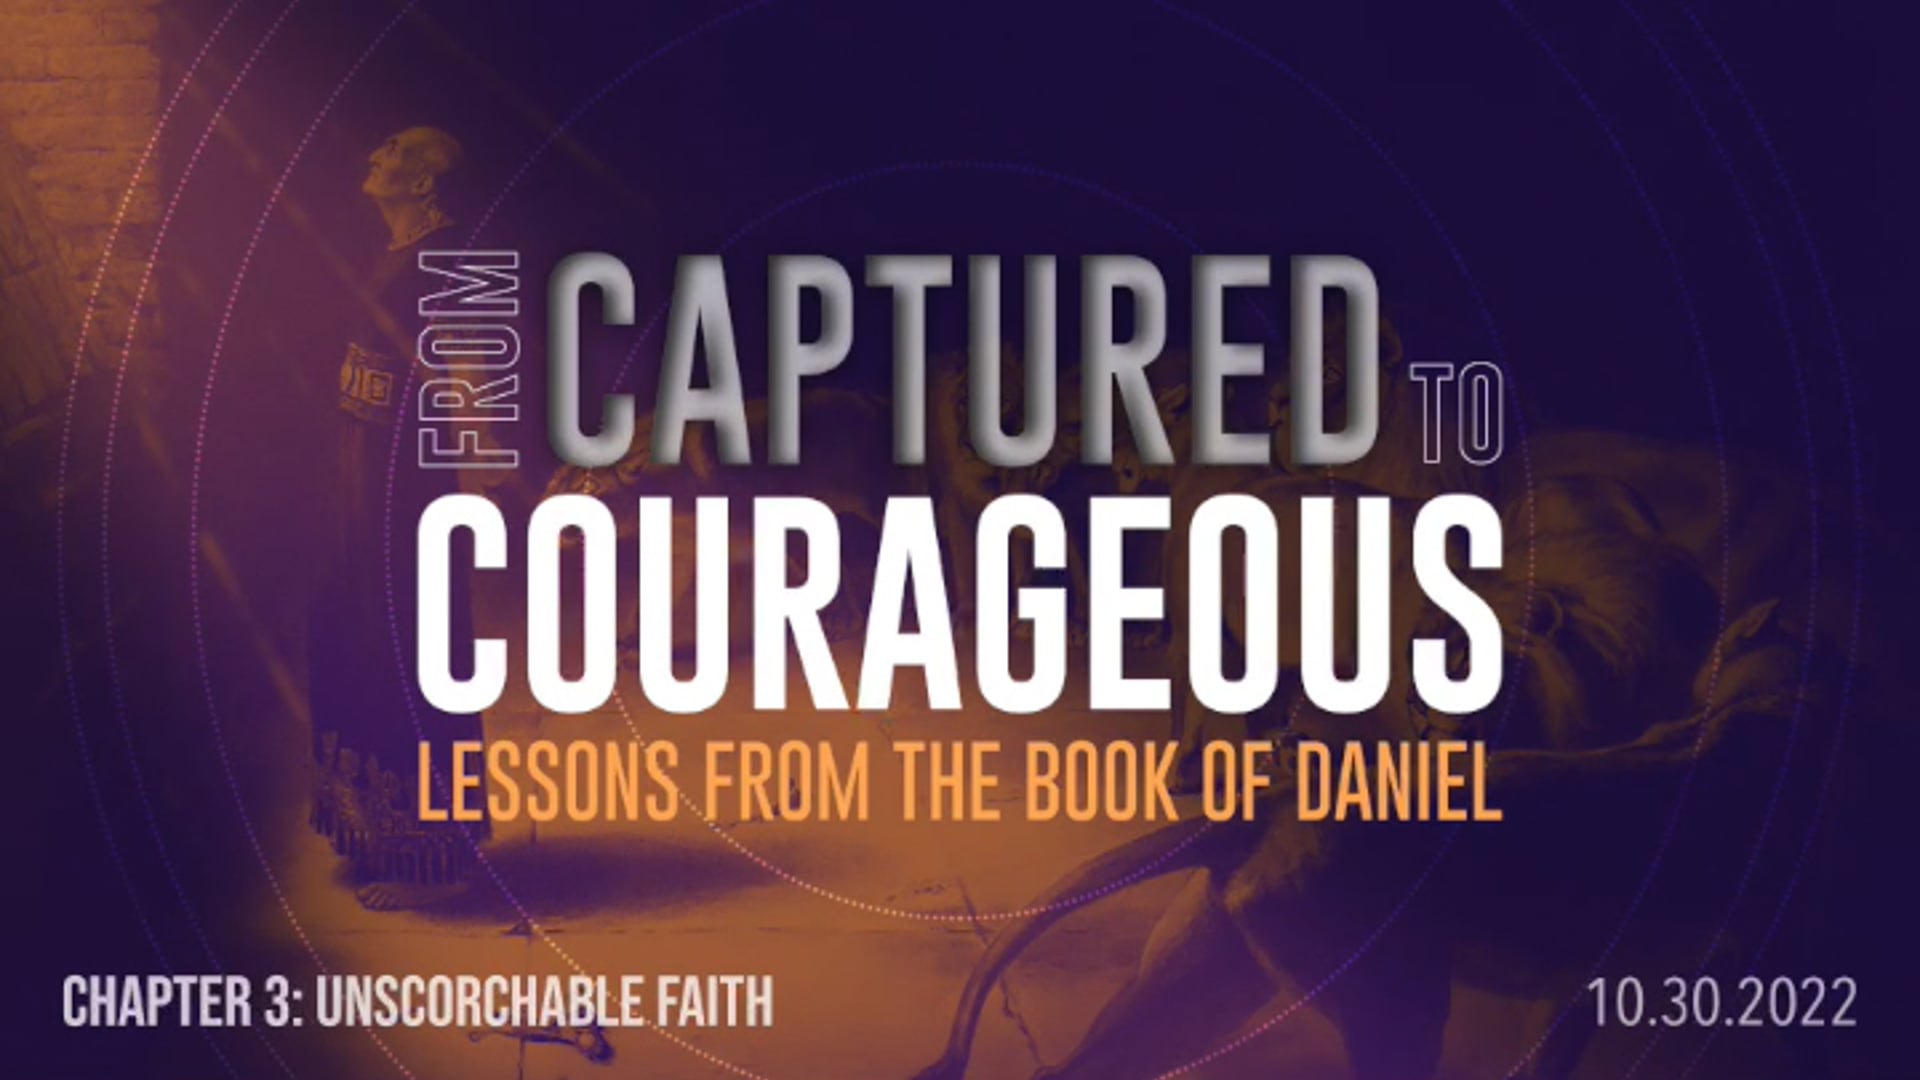 From Captured to Courageous - Part 3: Unscorchable Faith